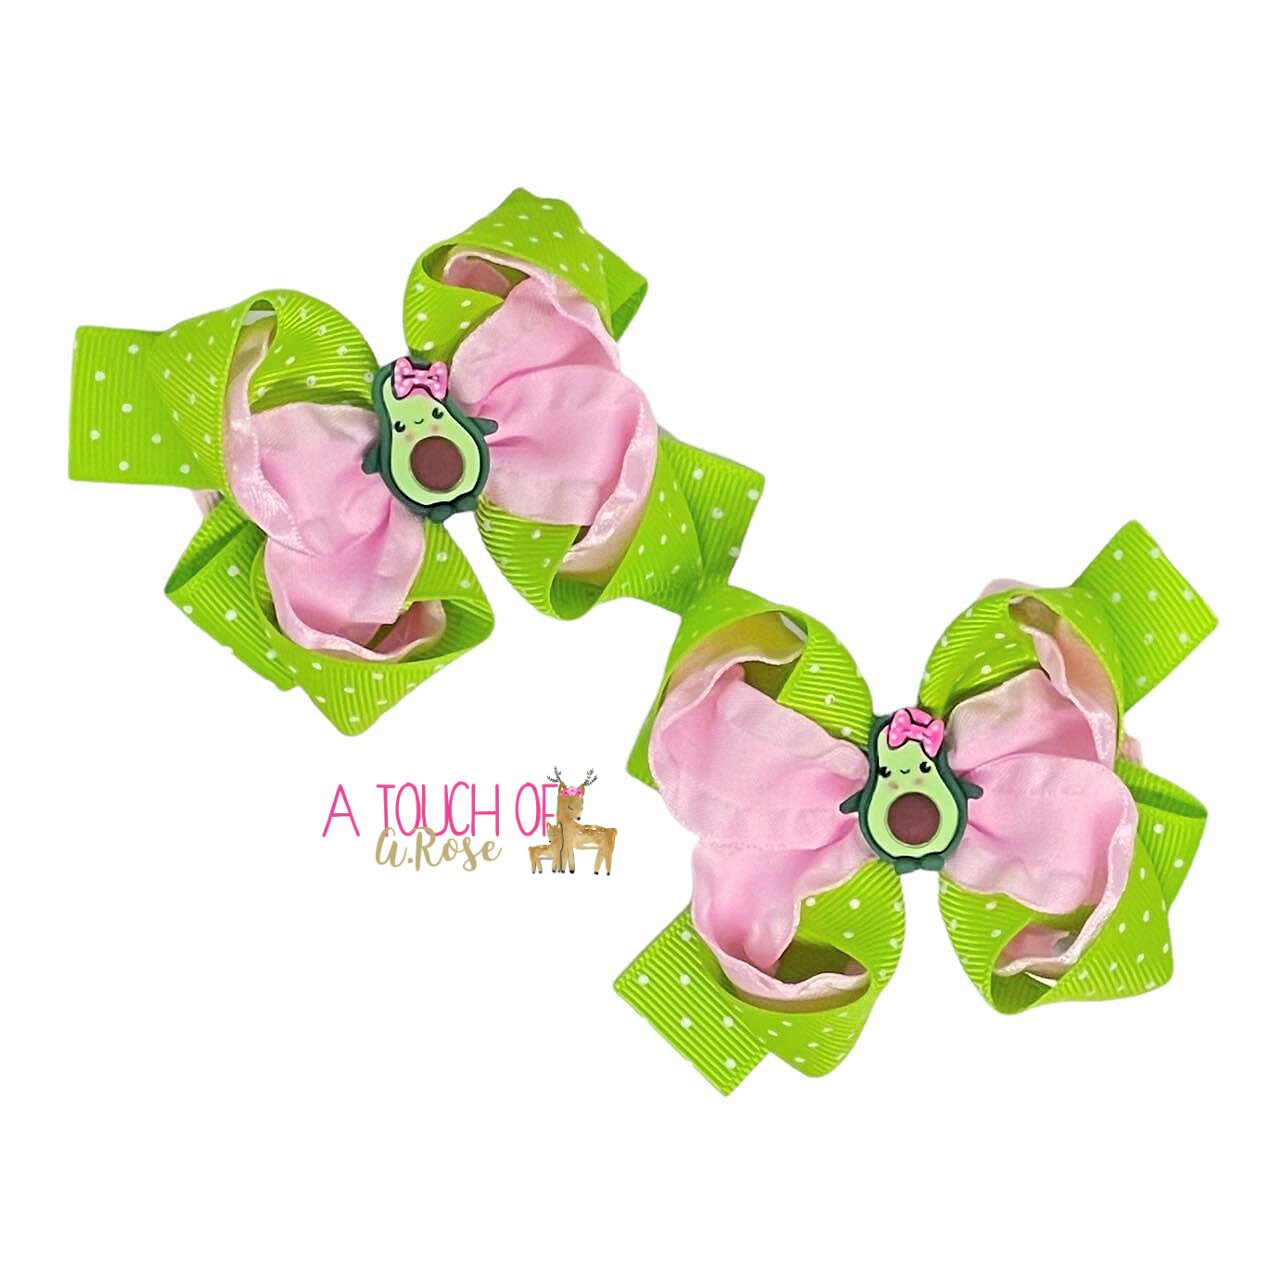 Avocado Pack faux leather sheets great for bows and earrings